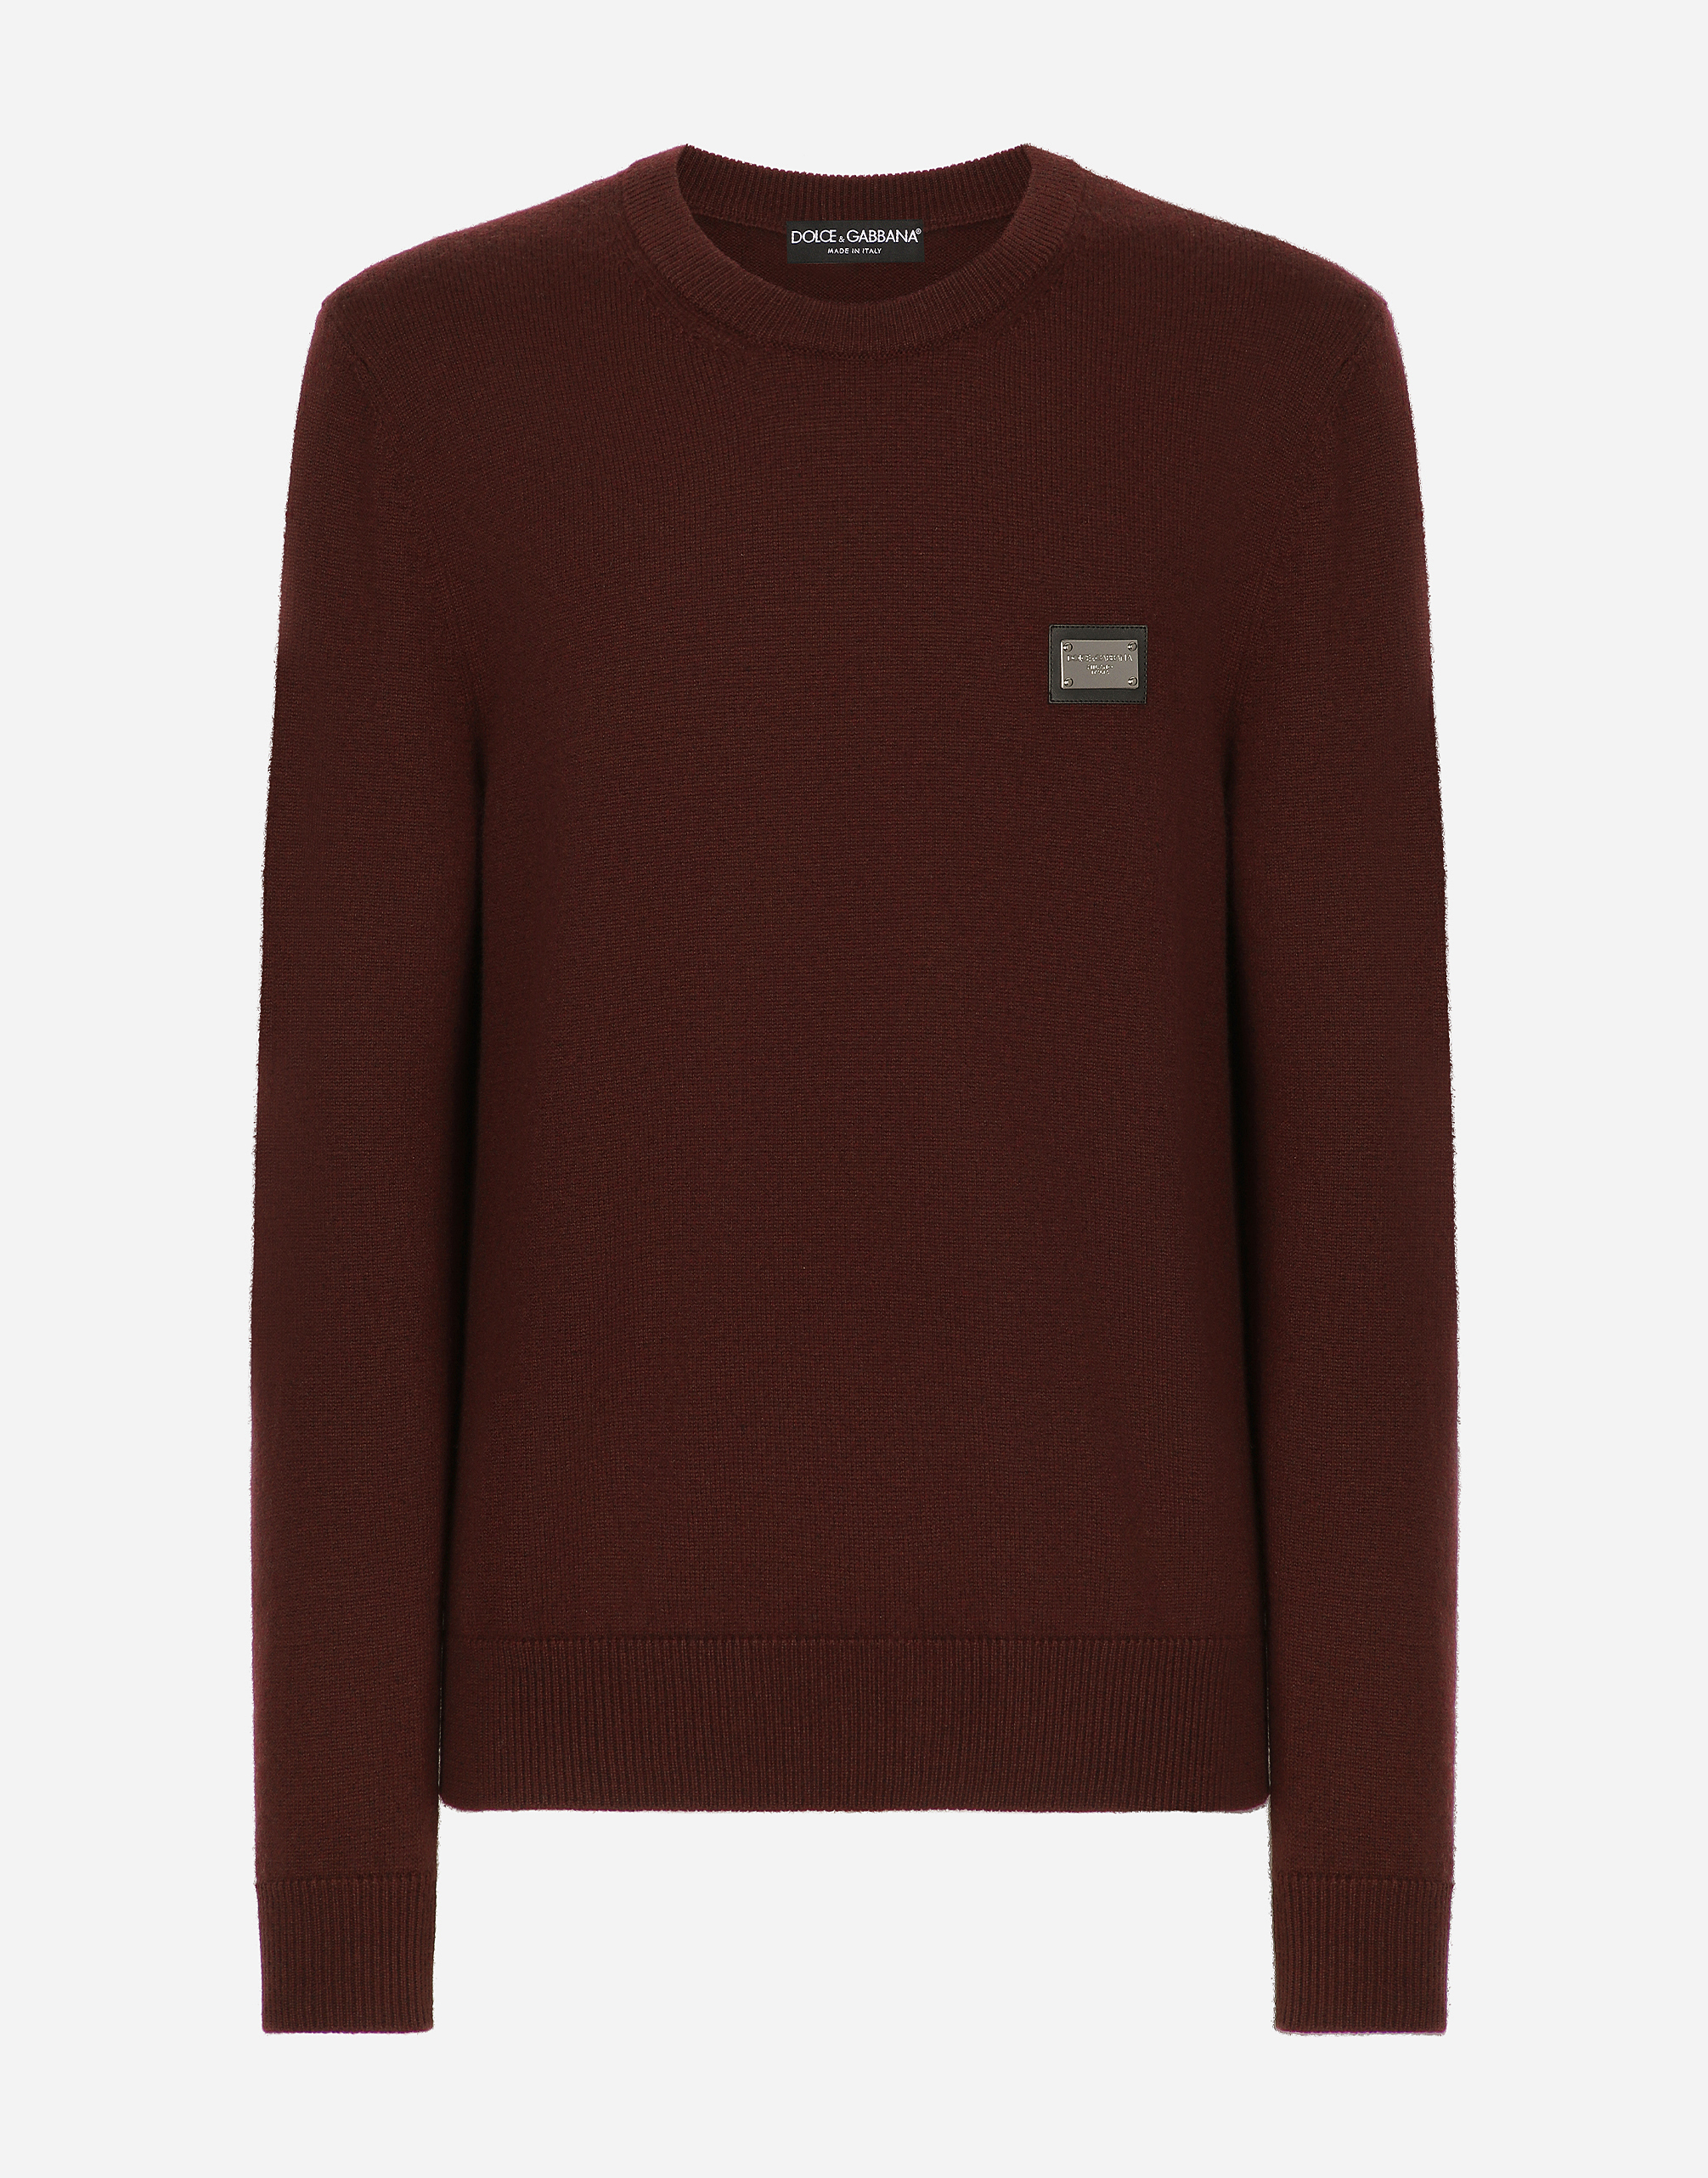 Wool round-neck sweater with branded tag in Bordeaux